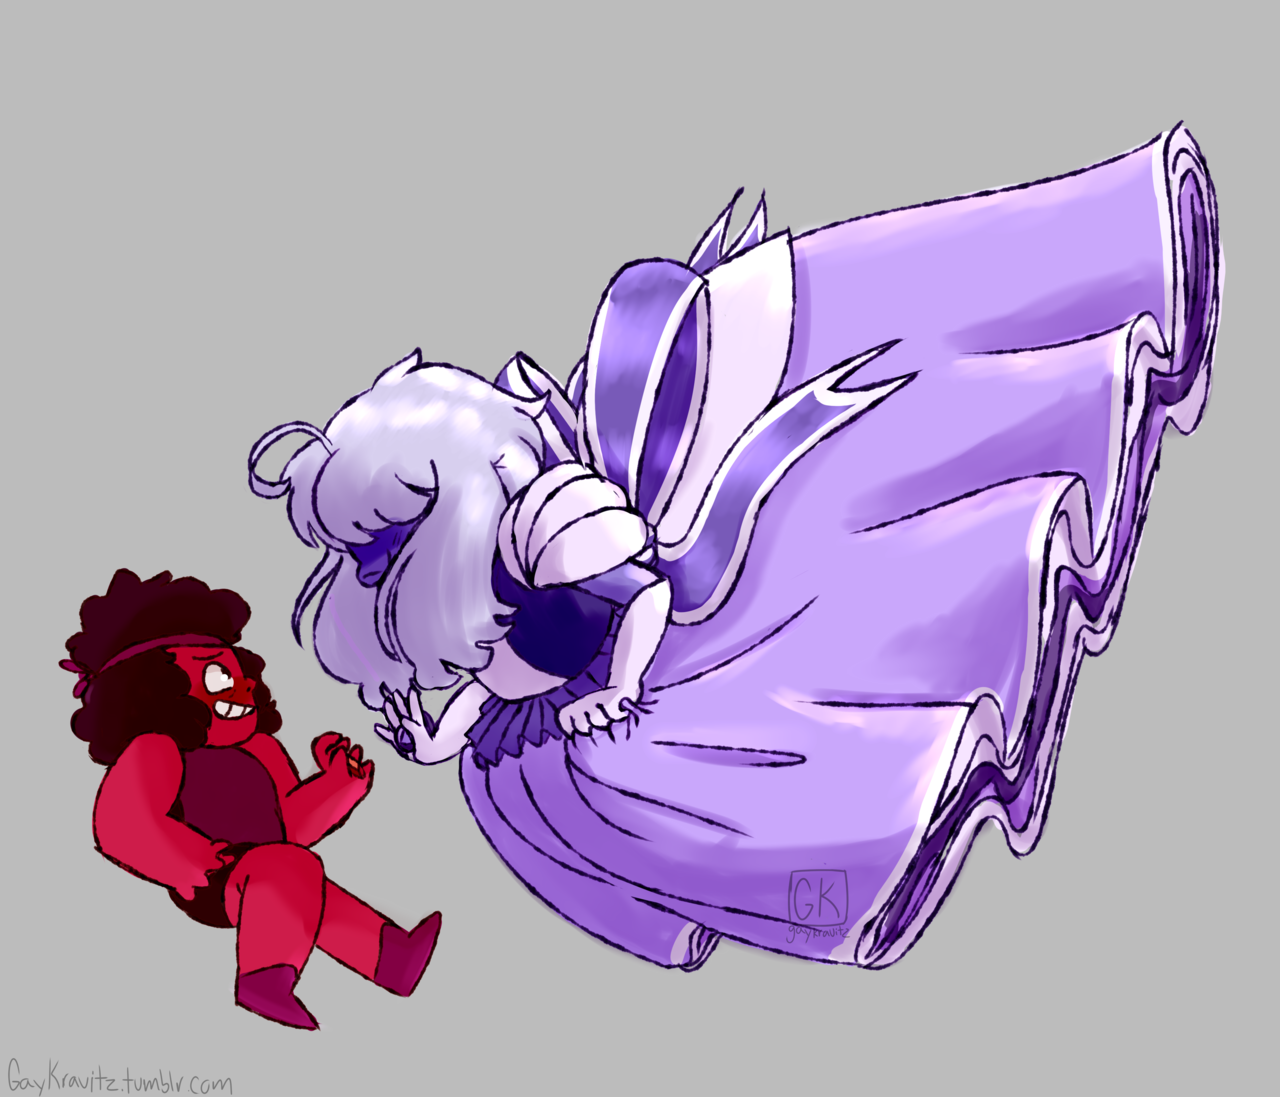 my version of a padparadscha + sapphire fusion, lilac sapphire.